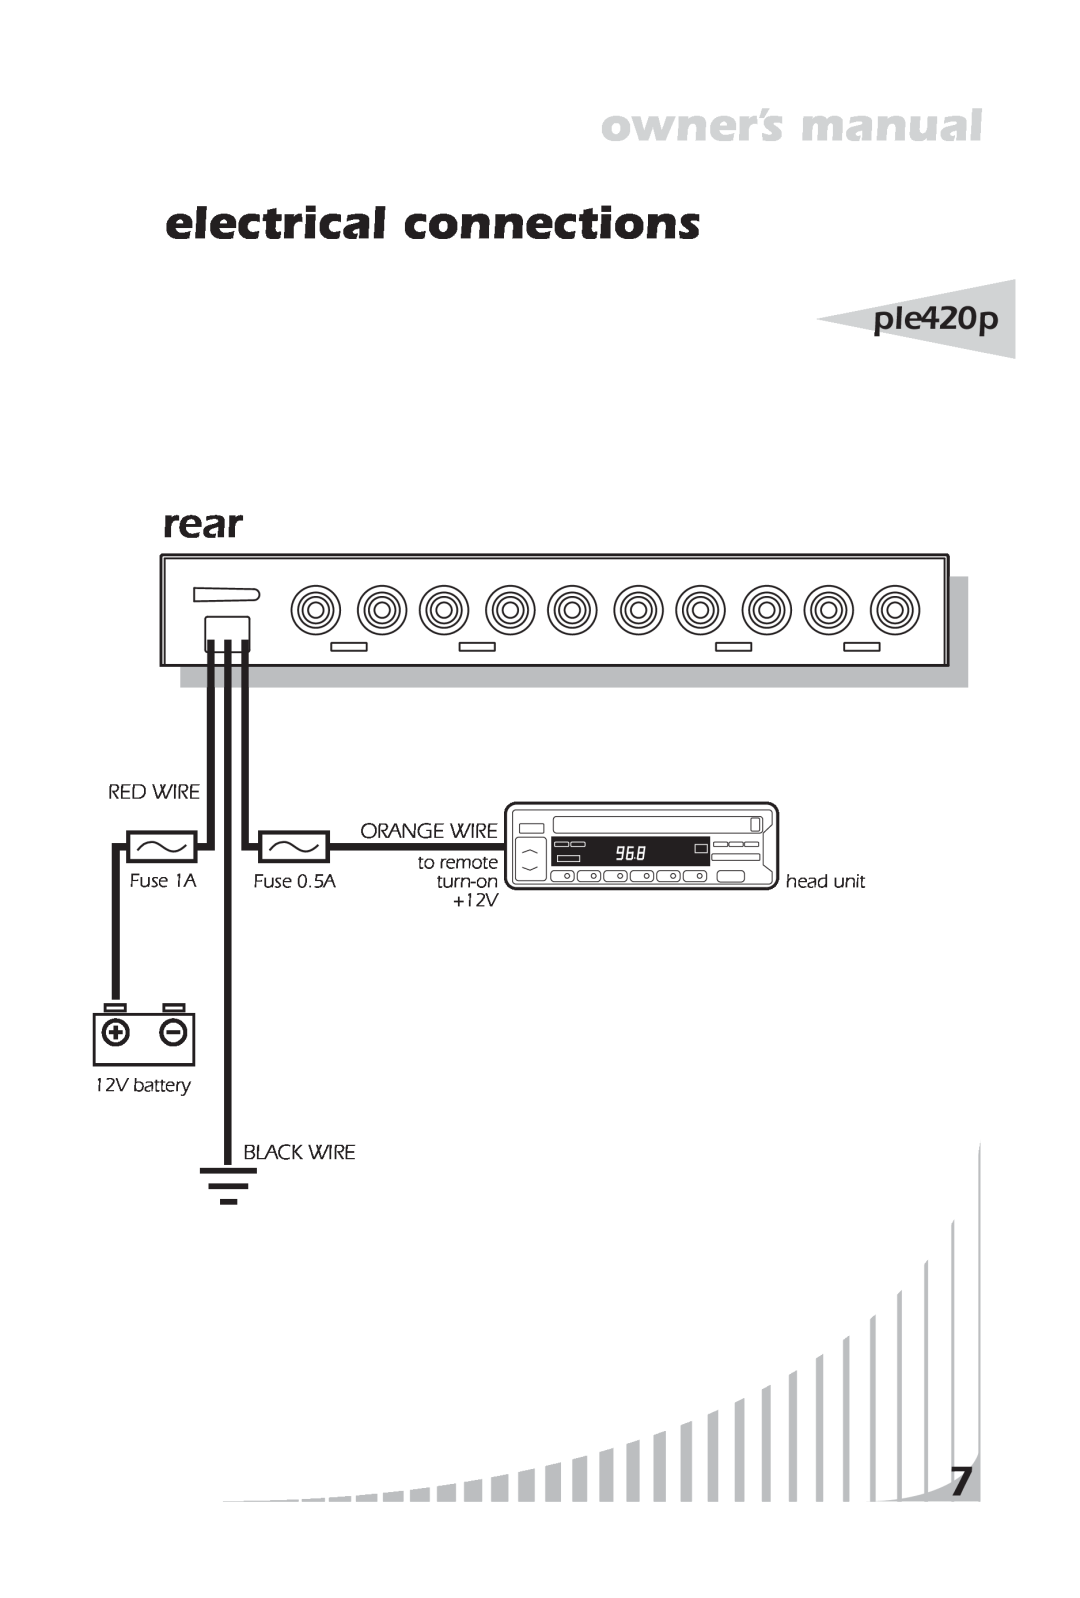 PYLE Audio ple420p owner manual electrical connections, rear 